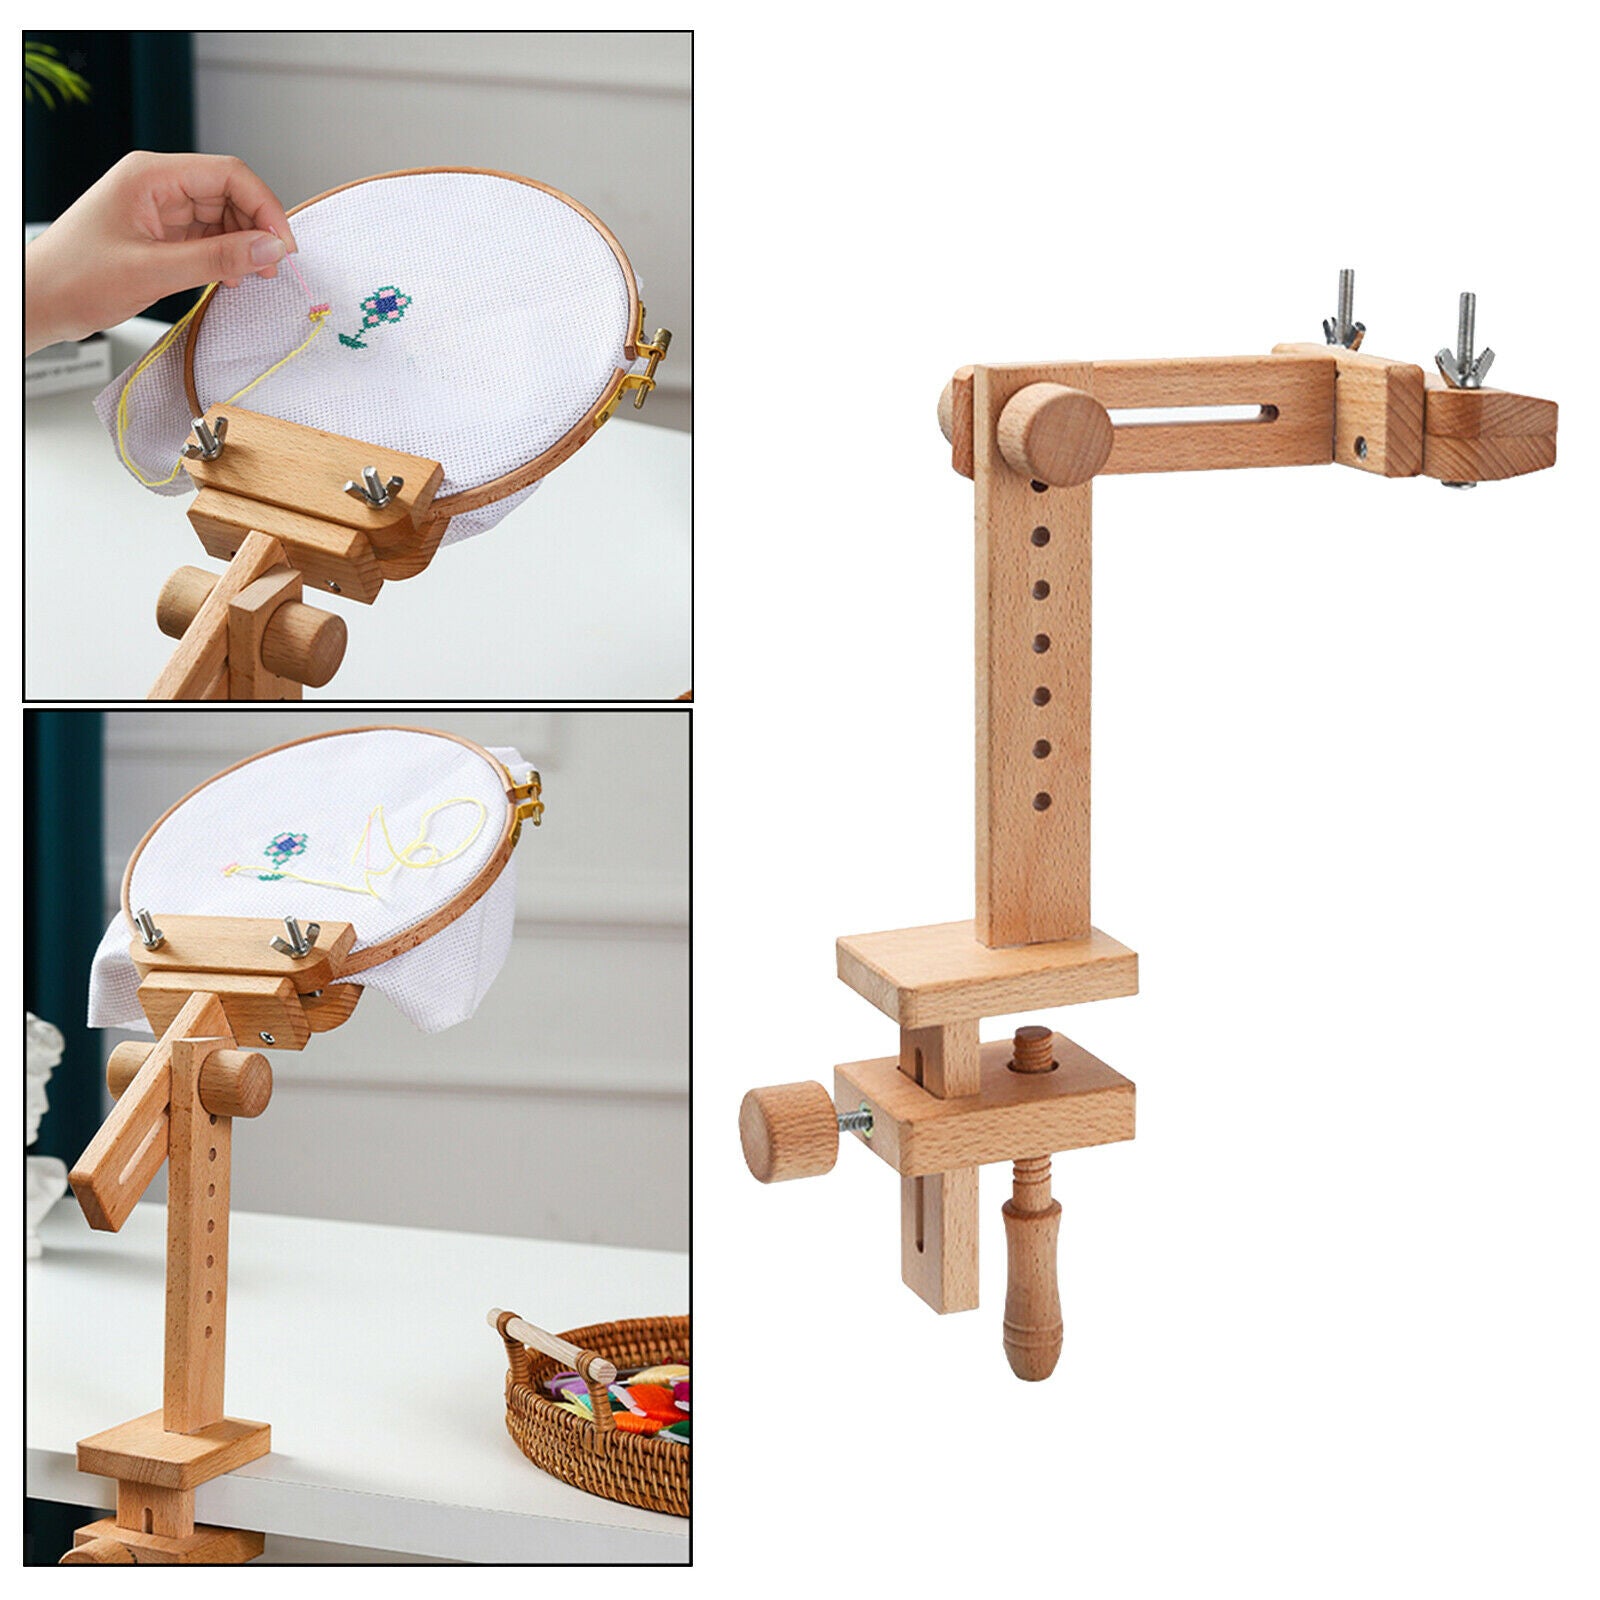 Rotating Cross Stitch Frame Clamps Lap Stand Embroidery Holder Stitchwork